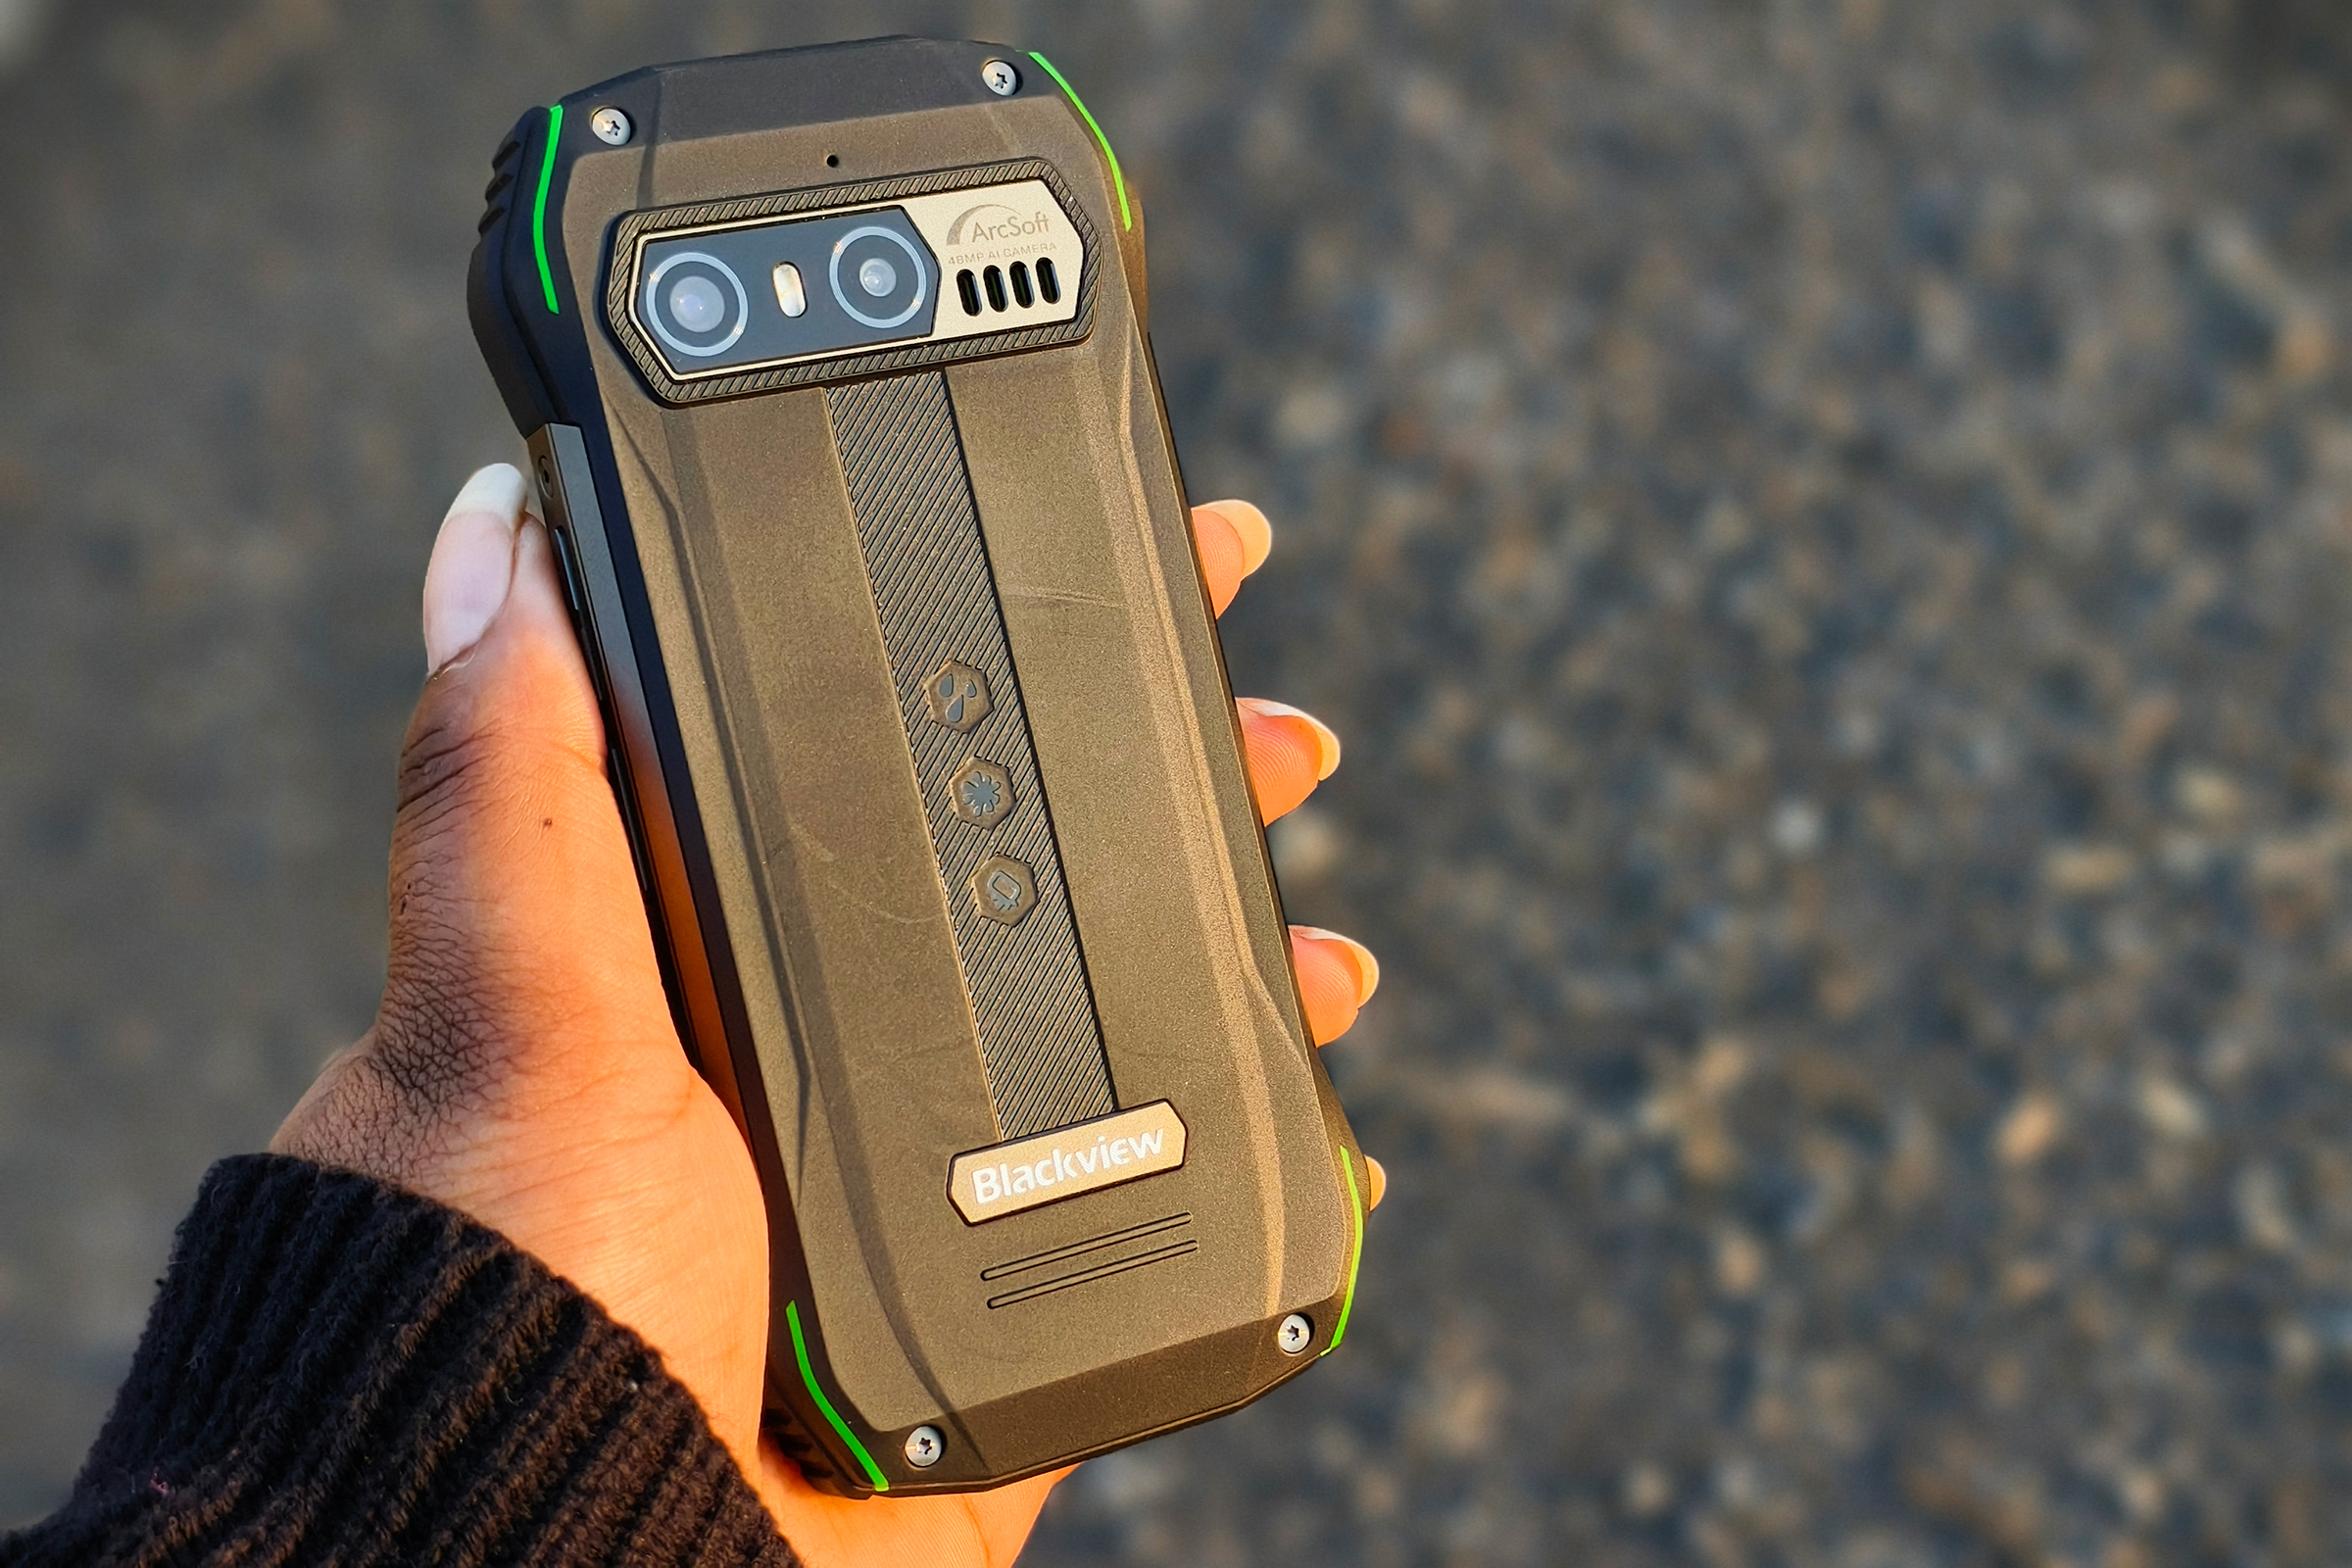 Person holding Blacview N6000 tiny rugged Android phone in hand against asphalt.